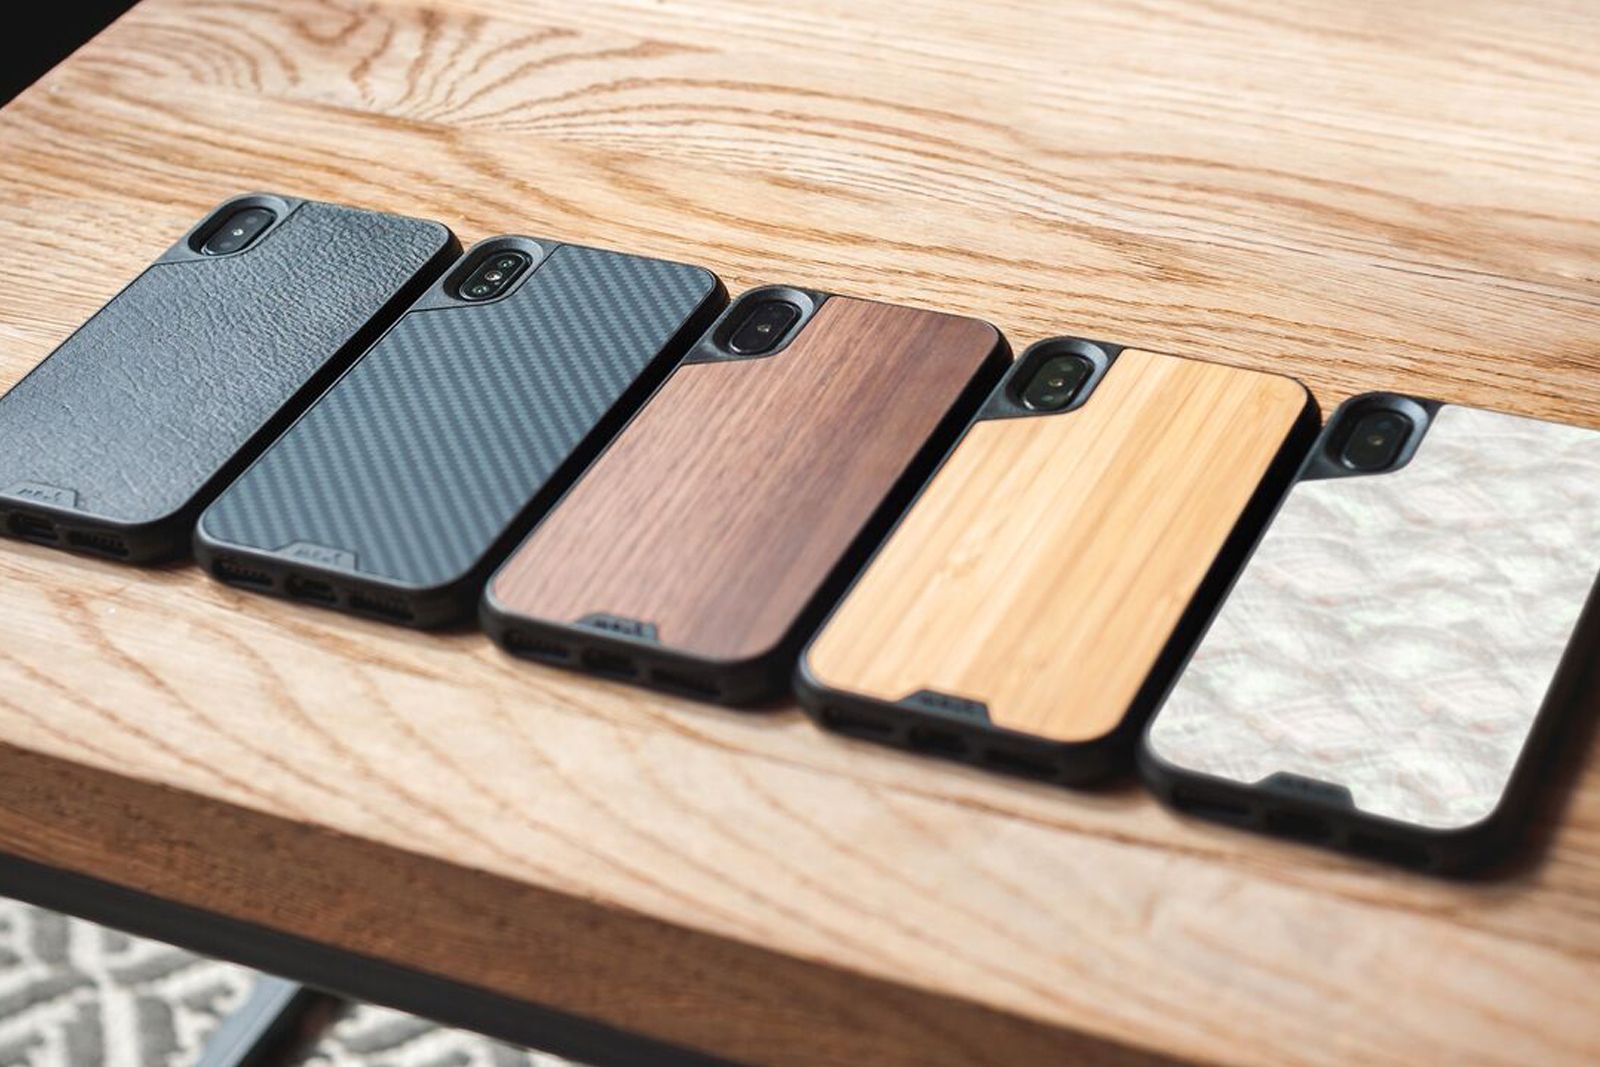 Best Iphone Xs And Xs Max Cases Protect Your New Apple Smartphone image 8